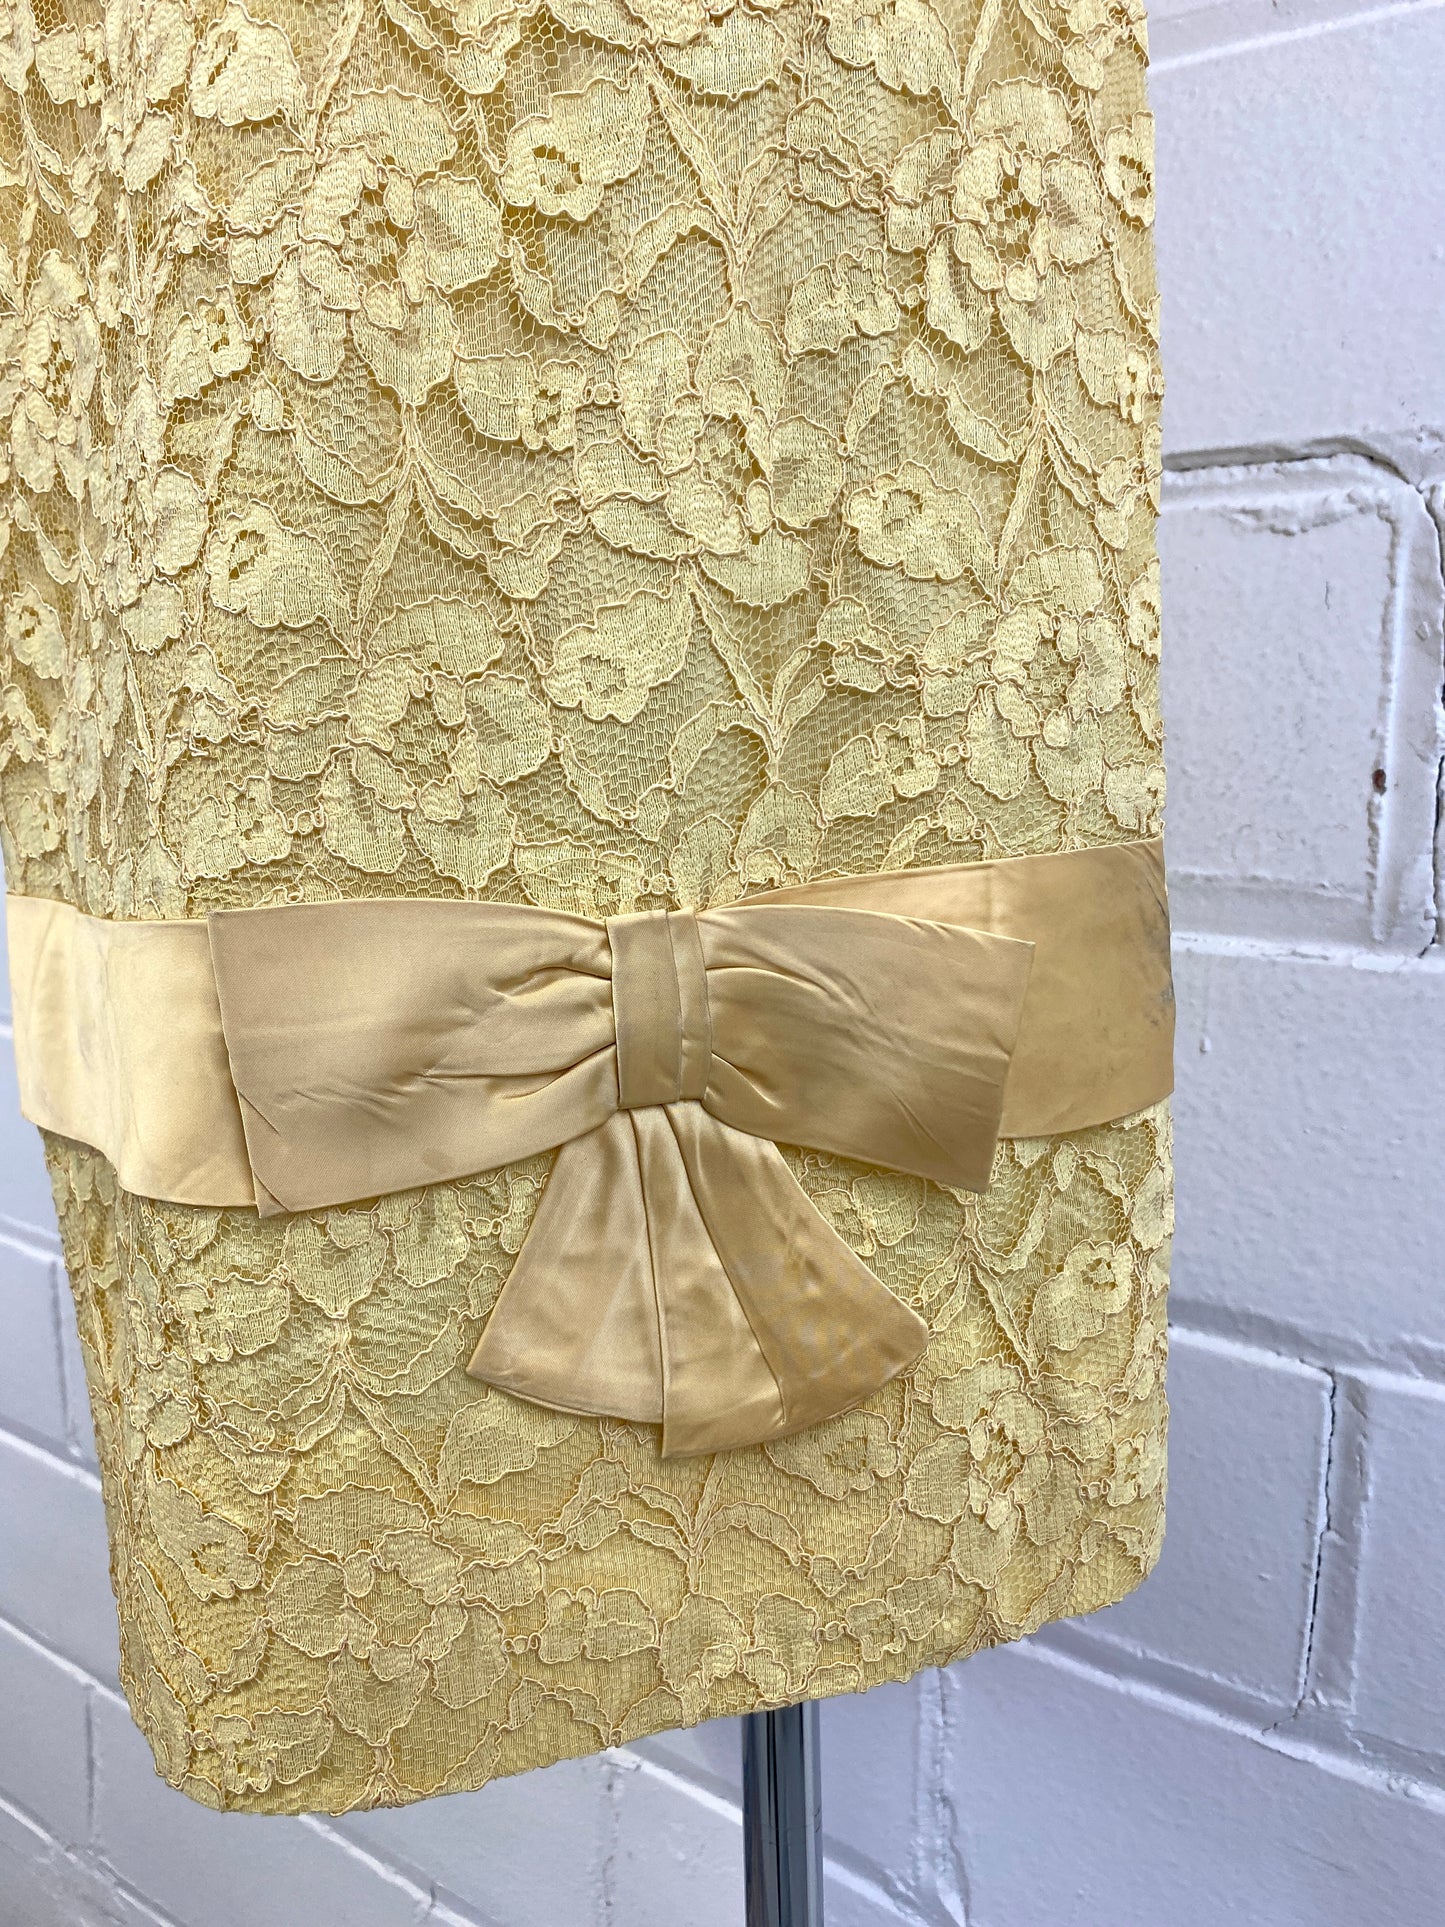 Vintage 1960s Yellow Lace Shift Dress with Bow, Large. Ian Drummond Vintage.